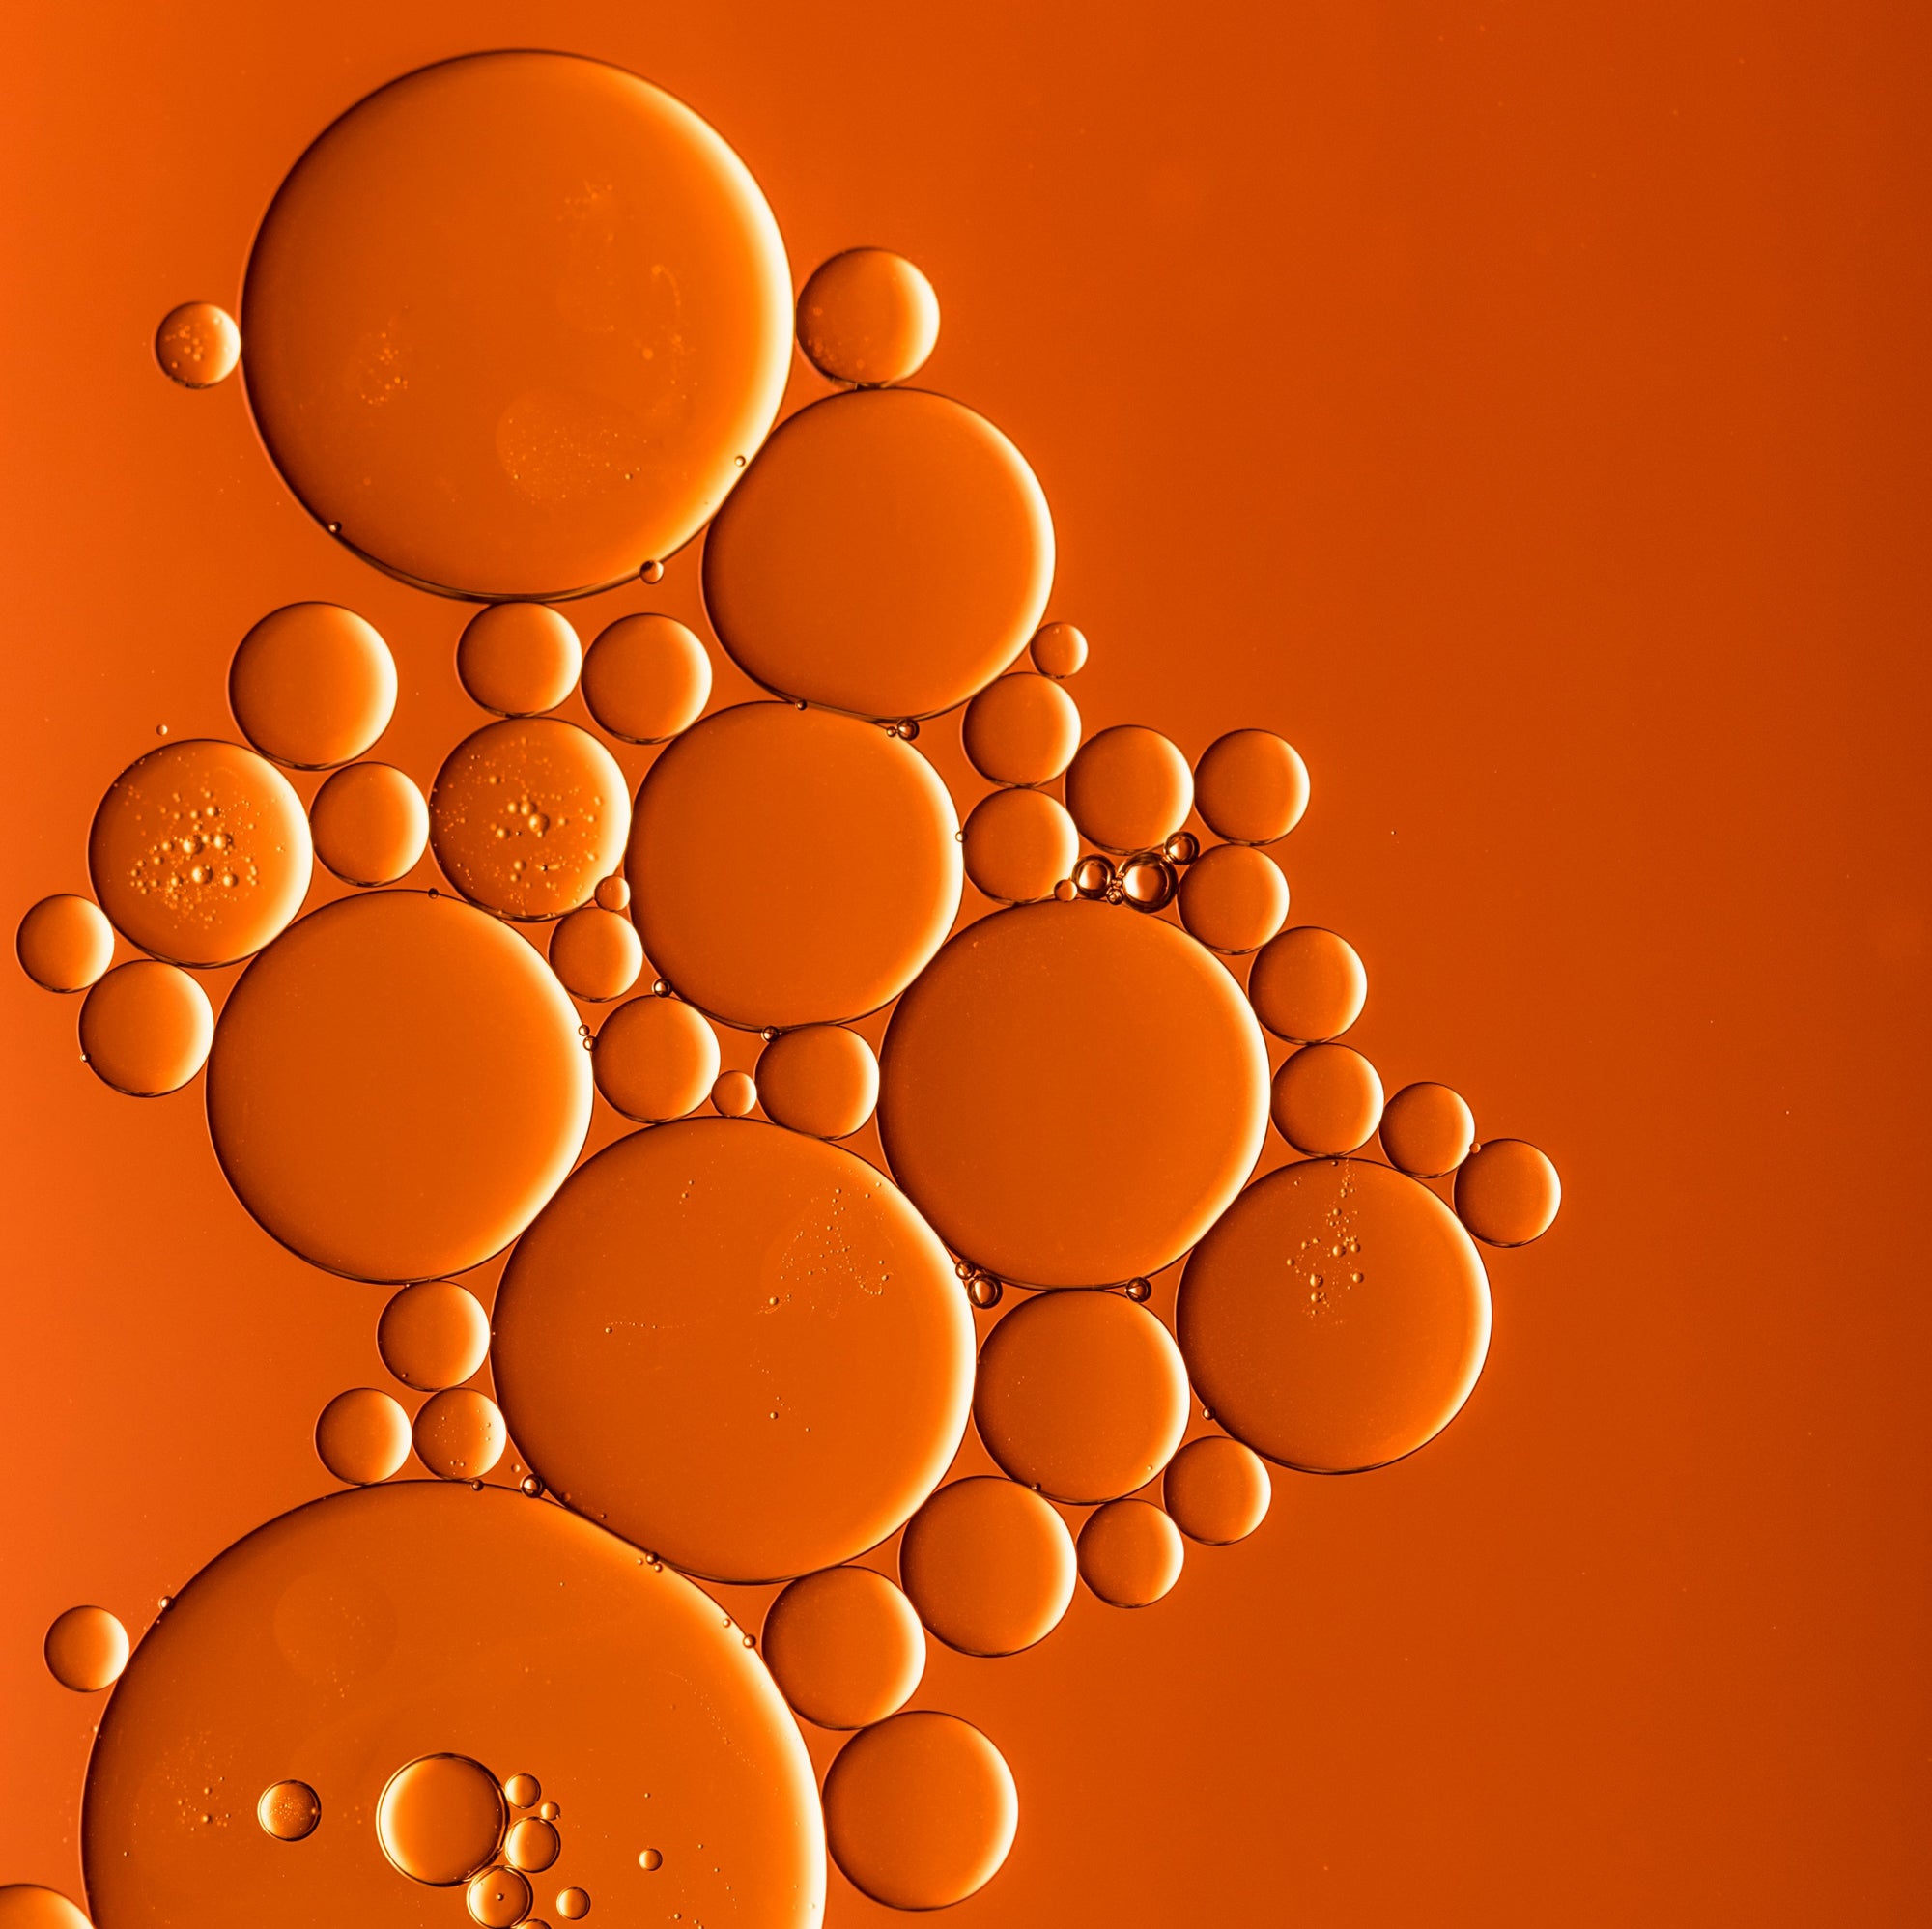 This image features an abstract composition of variously sized, circular bubbles clustered together on an orange background. The arrangement creates a visually intriguing geometric pattern, with some bubbles overlapping and others spaced apart.